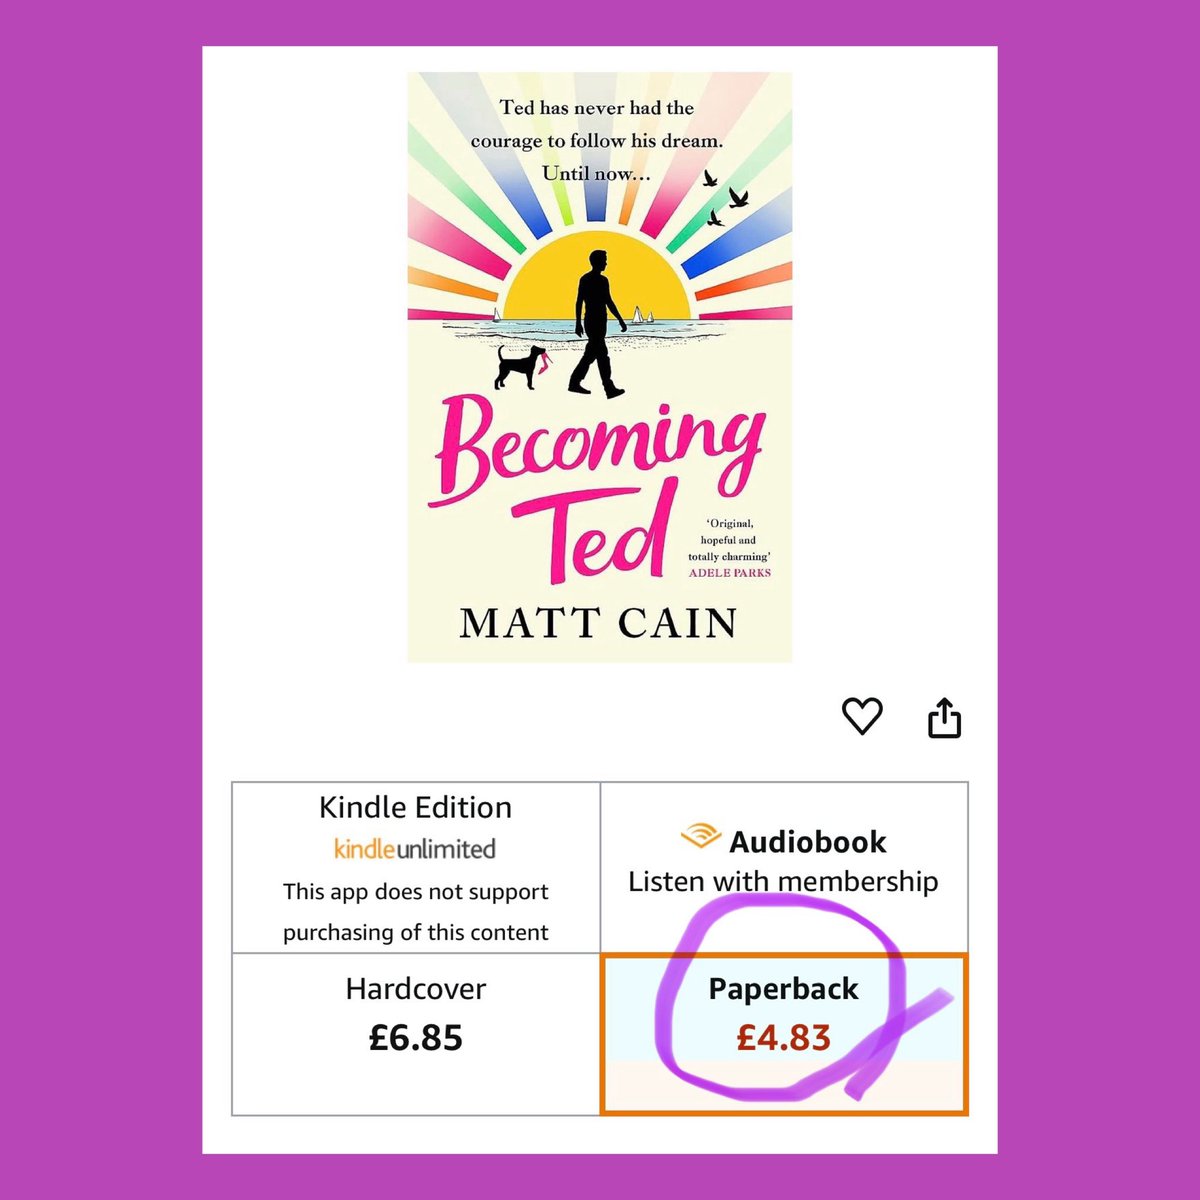 BARGAIN ALERT! Don’t ask me how or why but the paperback of #BecomingTed has just been slashed to £4.83 on Amazon! These things don’t usually last long so snap it up while you can! And please spread the word! ❤️❤️❤️ amzn.eu/d/7GdkgsS